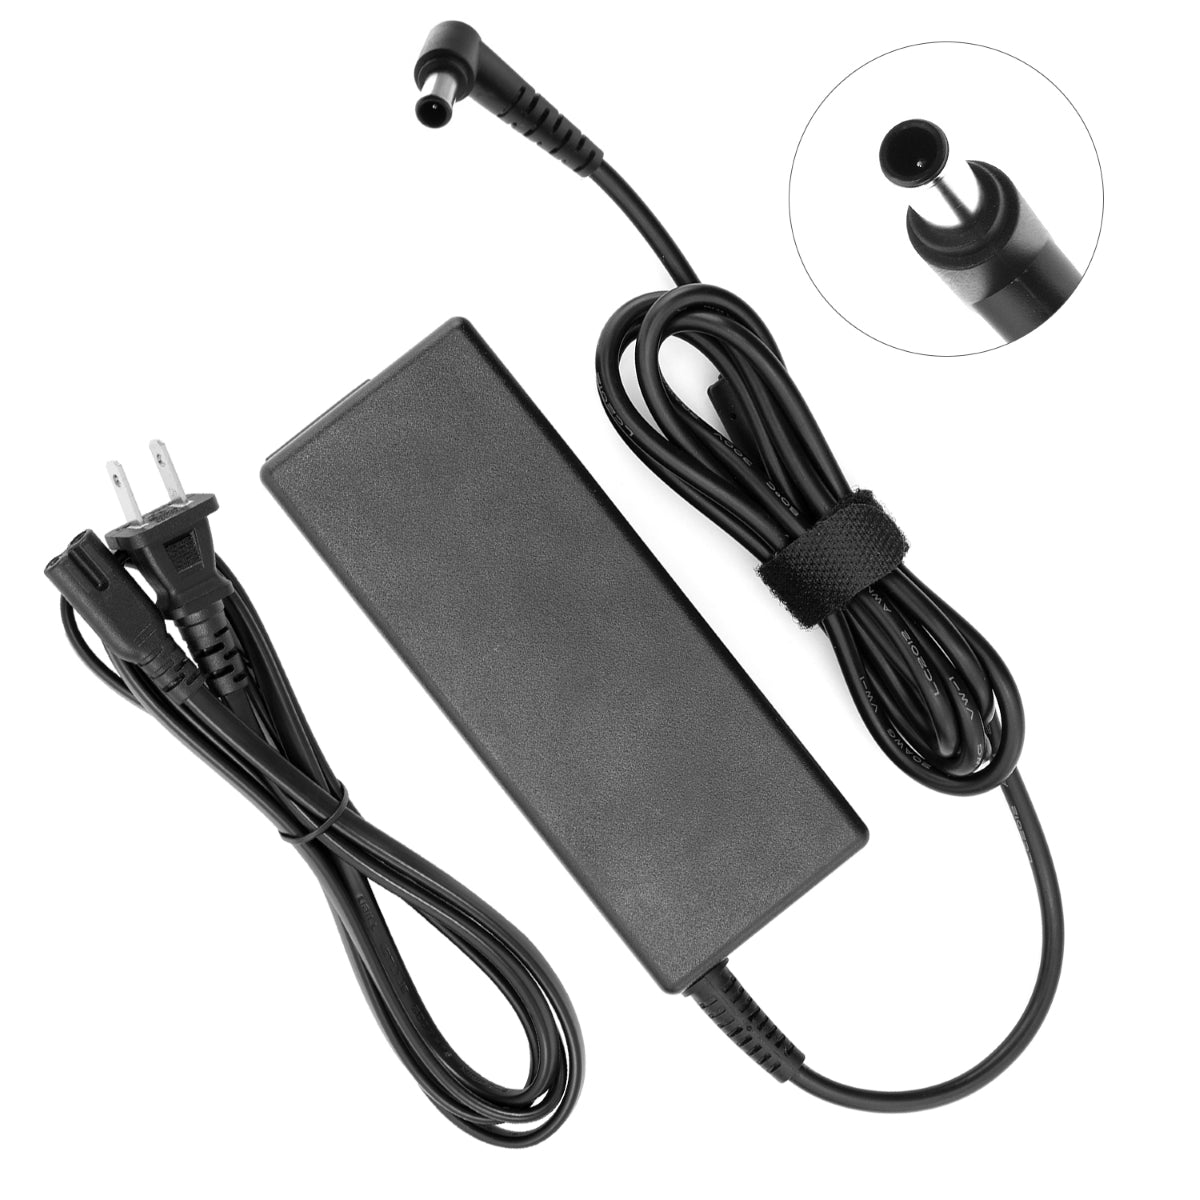 Power Adapter for Samsung UN32J5003 TV Monitor Display